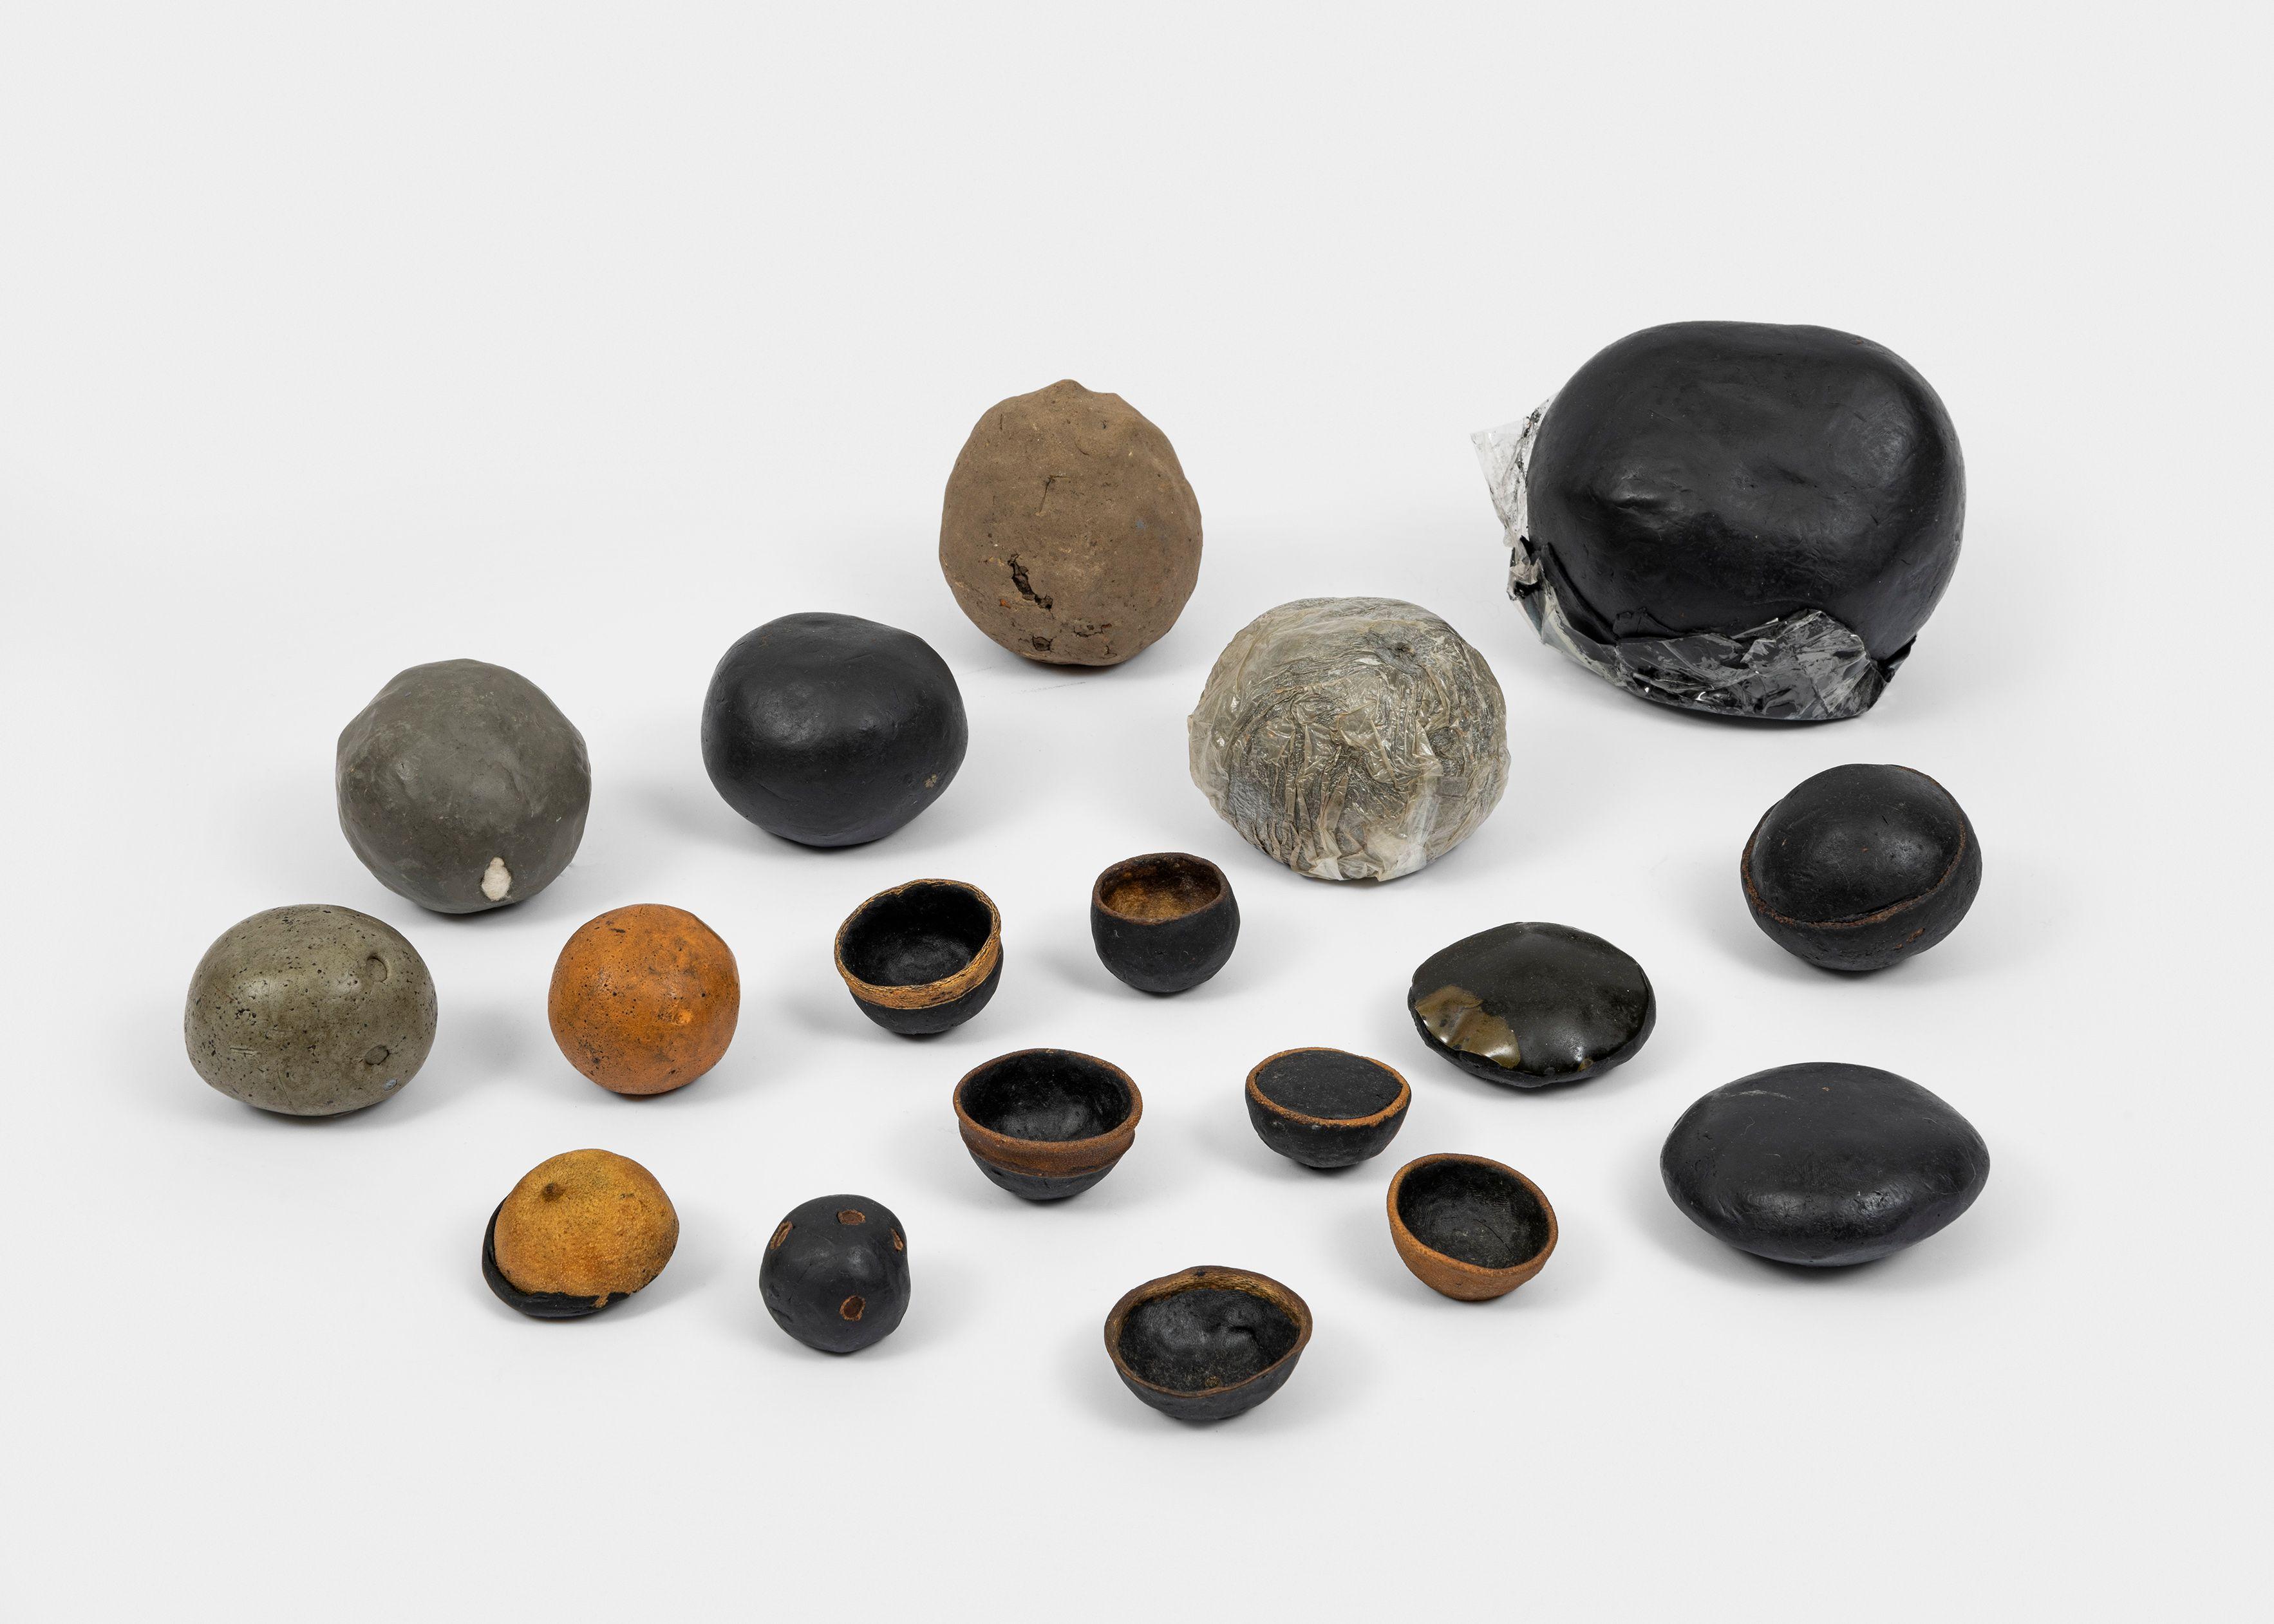 Model (32 skins, stones and spaces), from Working Table objects